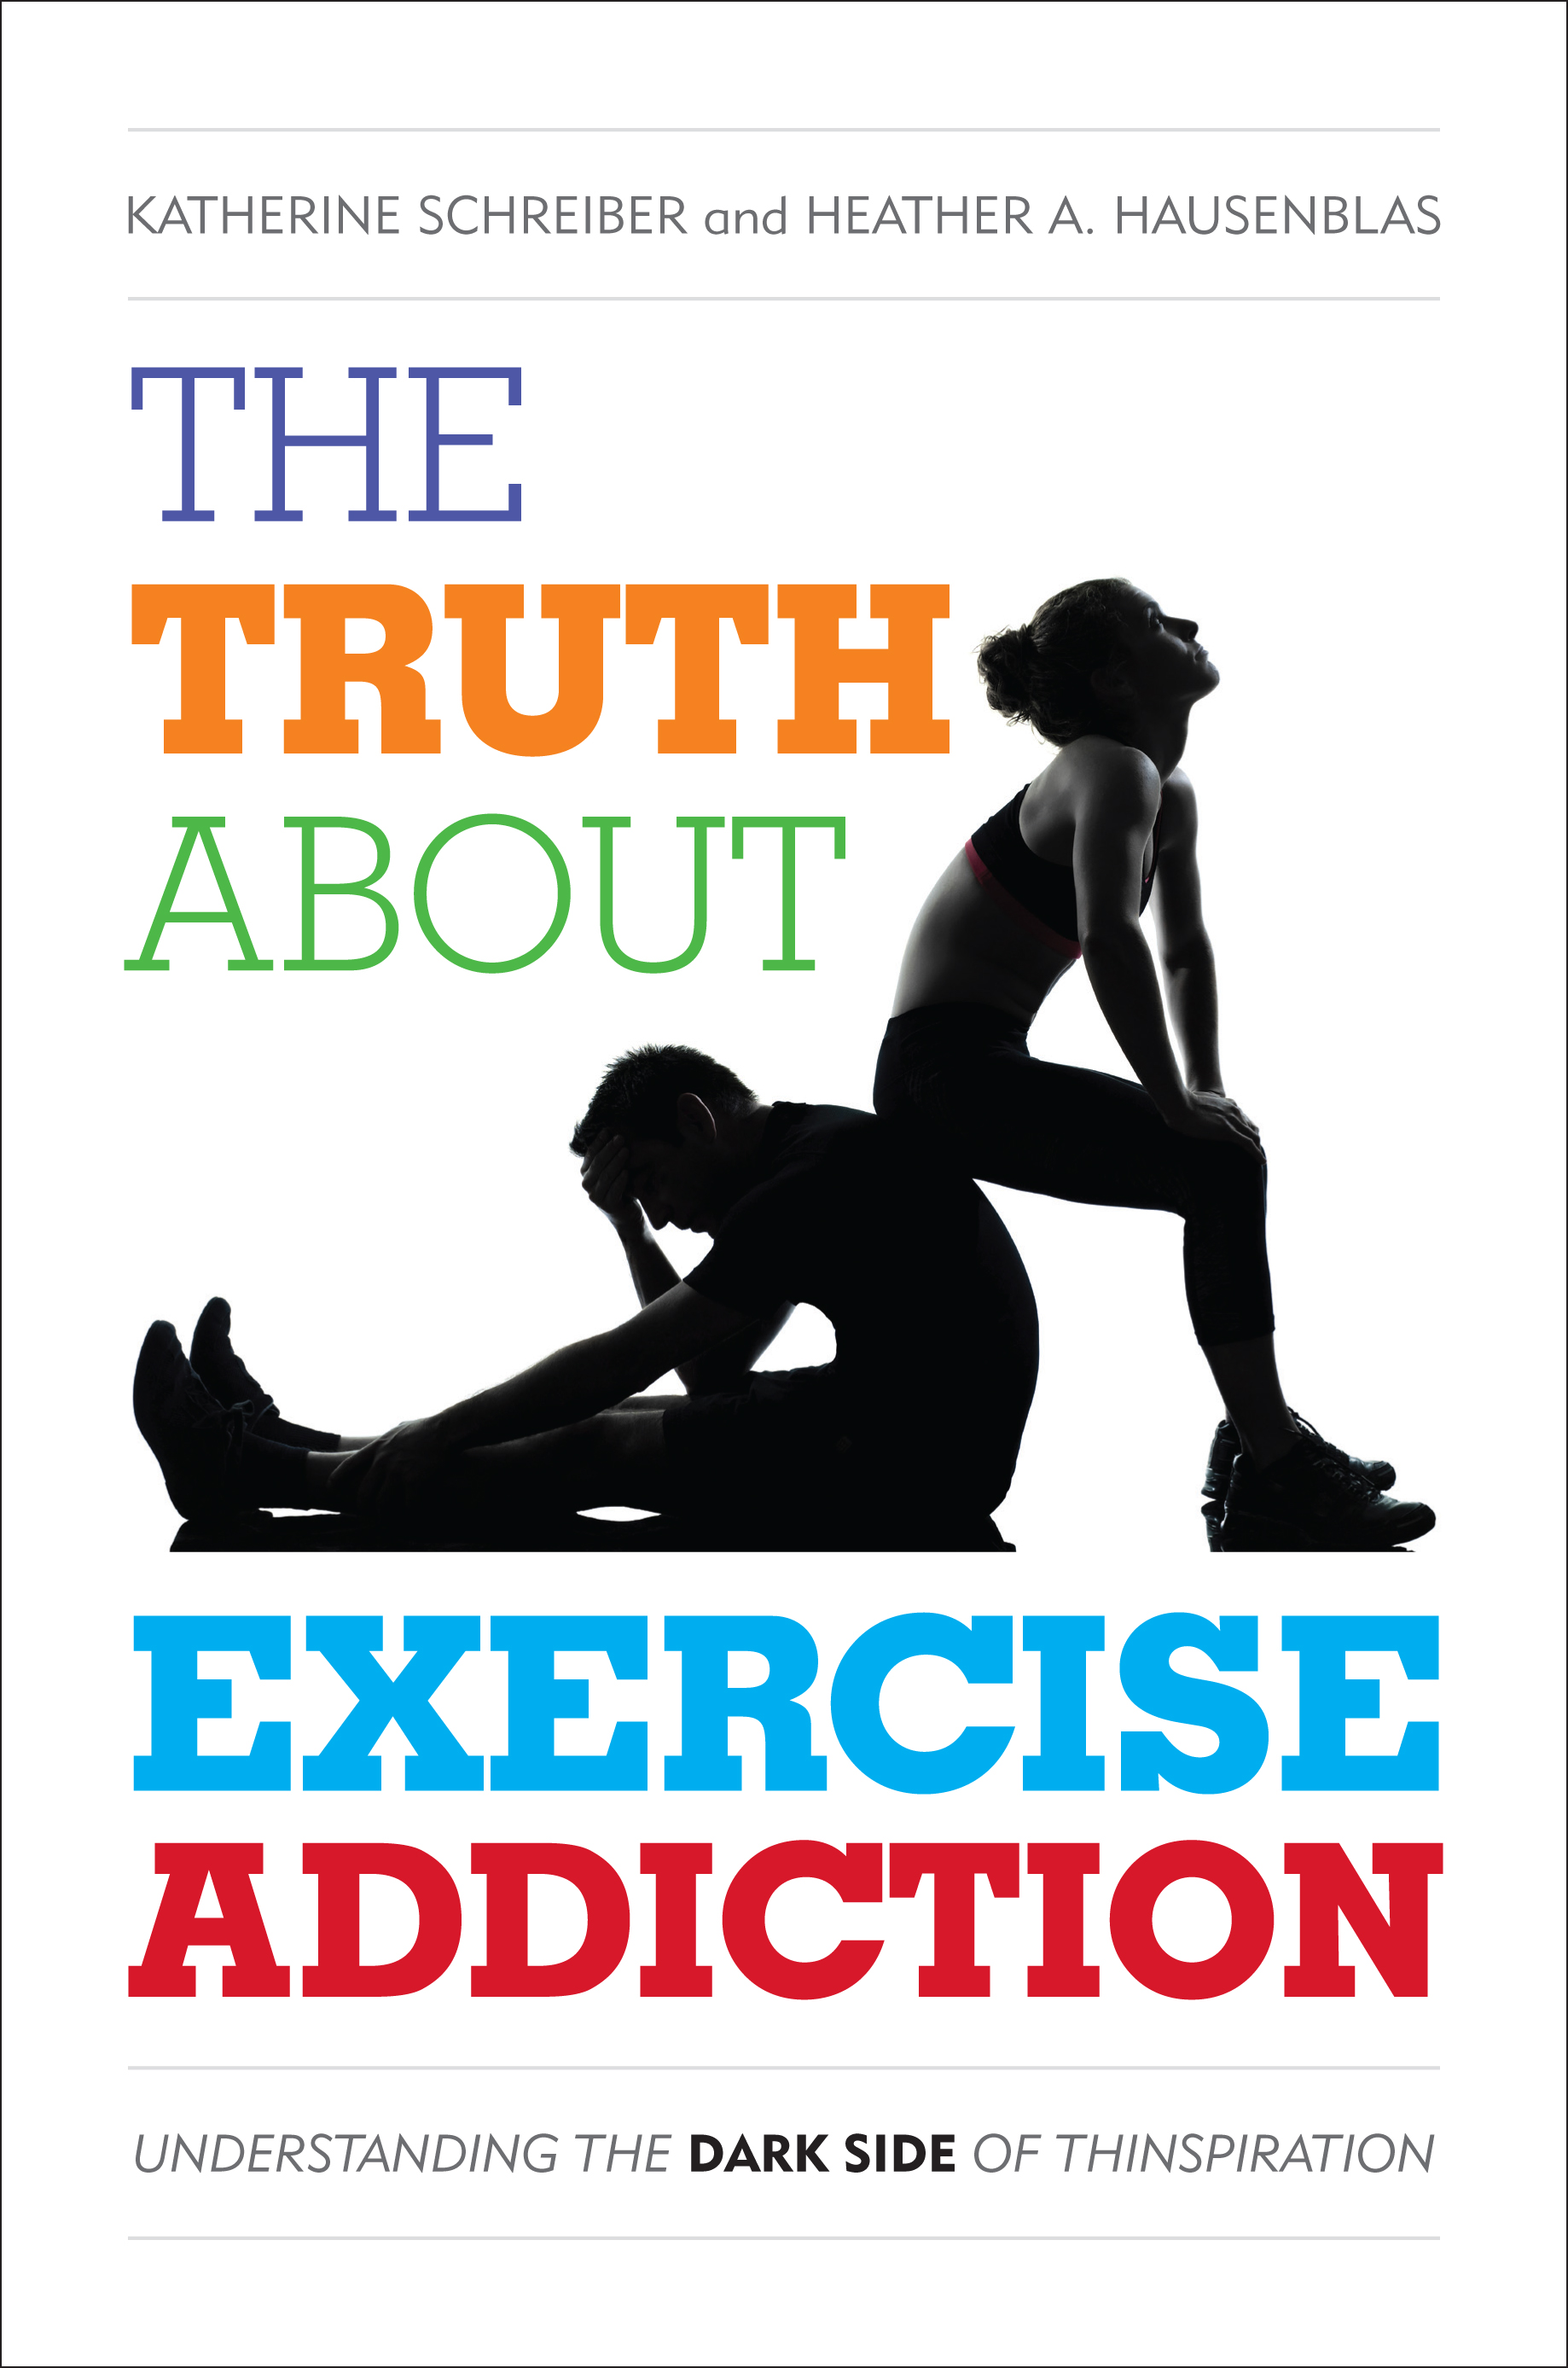 The Truth About Exercise Addiction: Understanding the Dark Side of Thinspiration